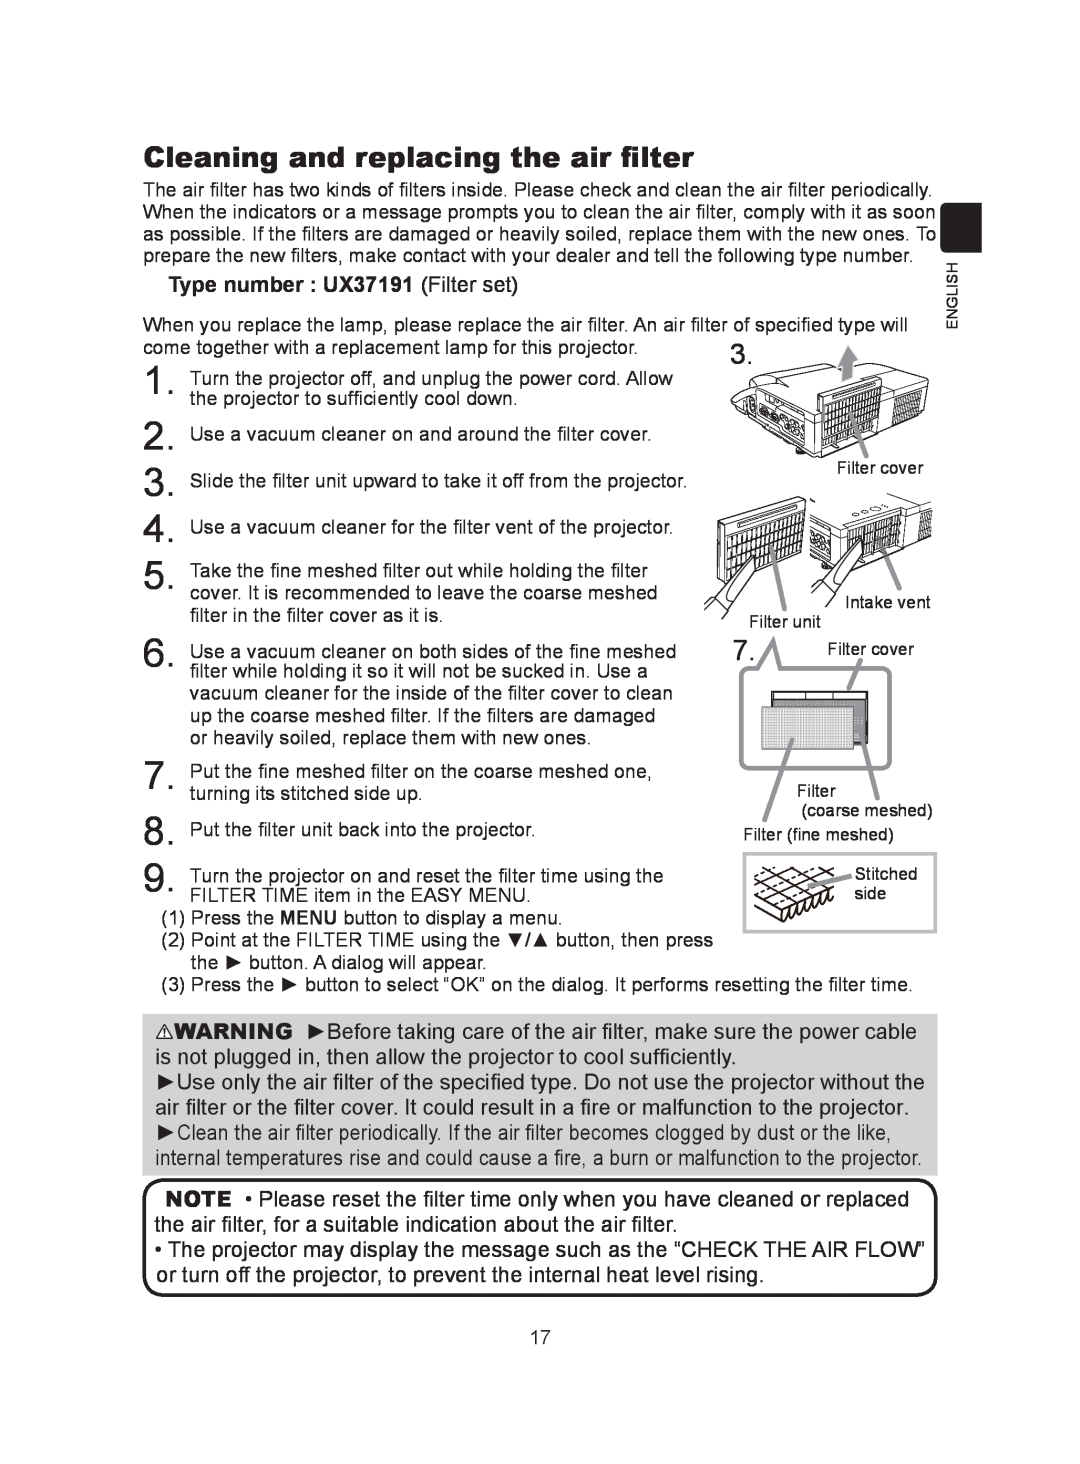 Hitachi CP-A300N user manual Cleaning and replacing the air filter, Type number UX37191 Filter set 